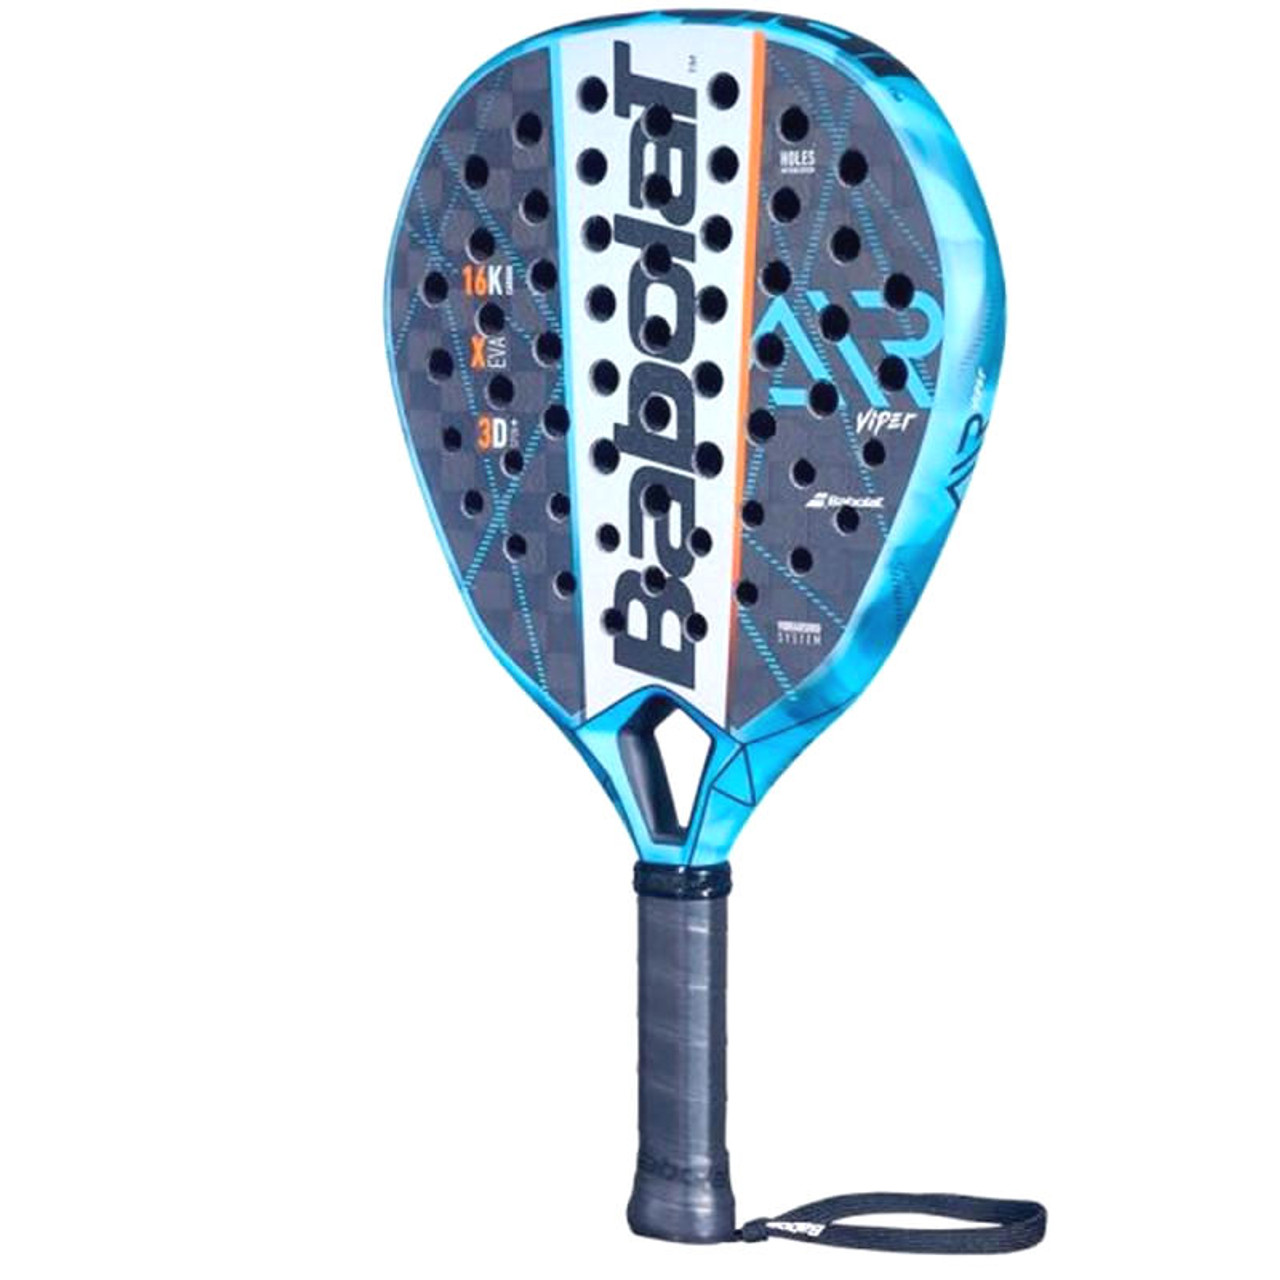 Platform, paddle, pop, padel tennis and pickleball - What's the